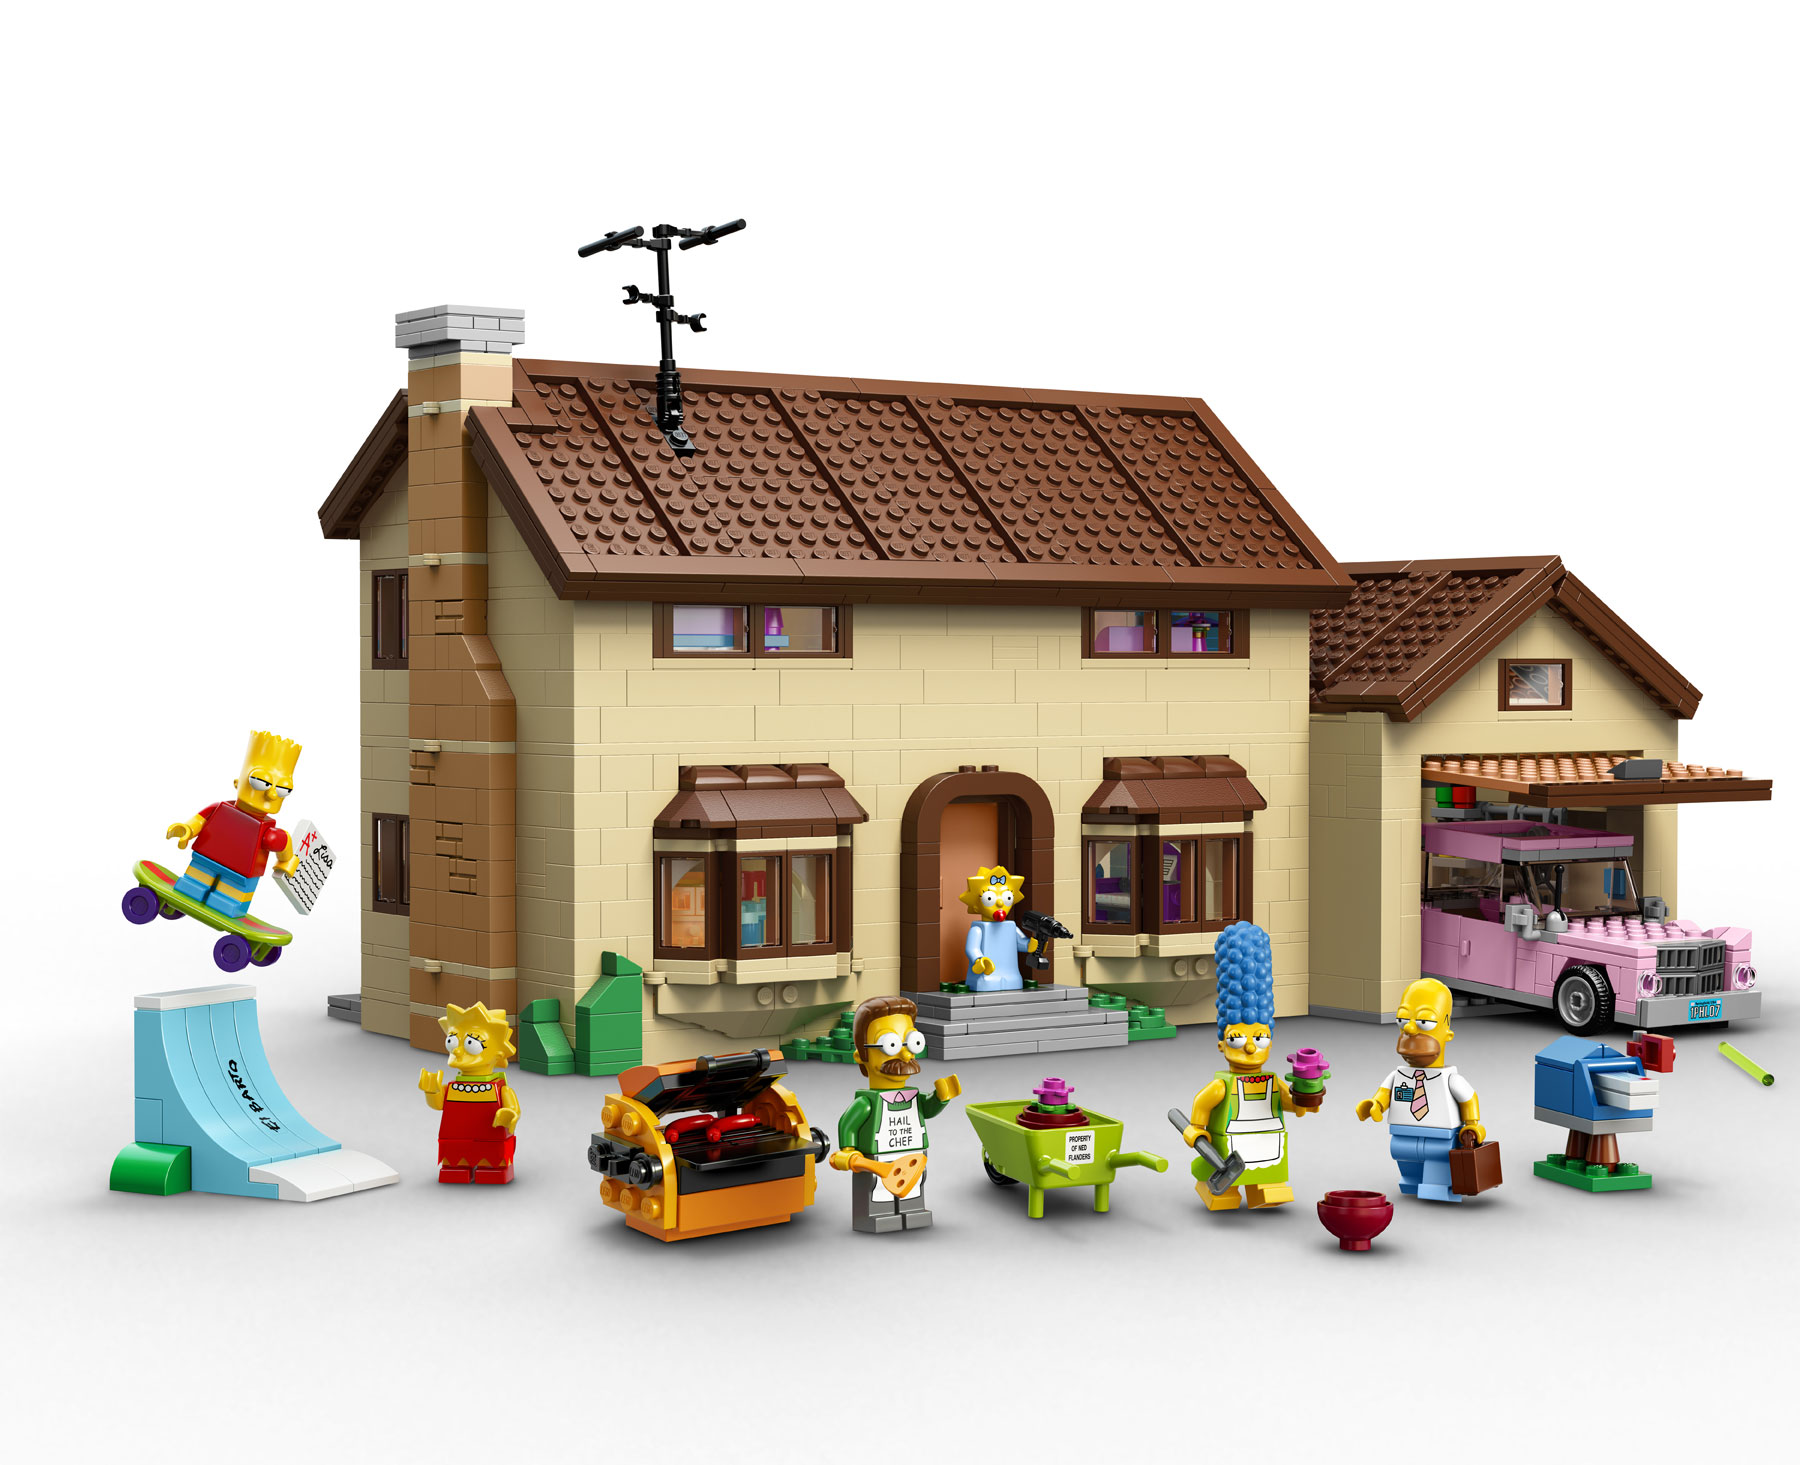 The LEGO Simpson’s House Is A Work Of Art